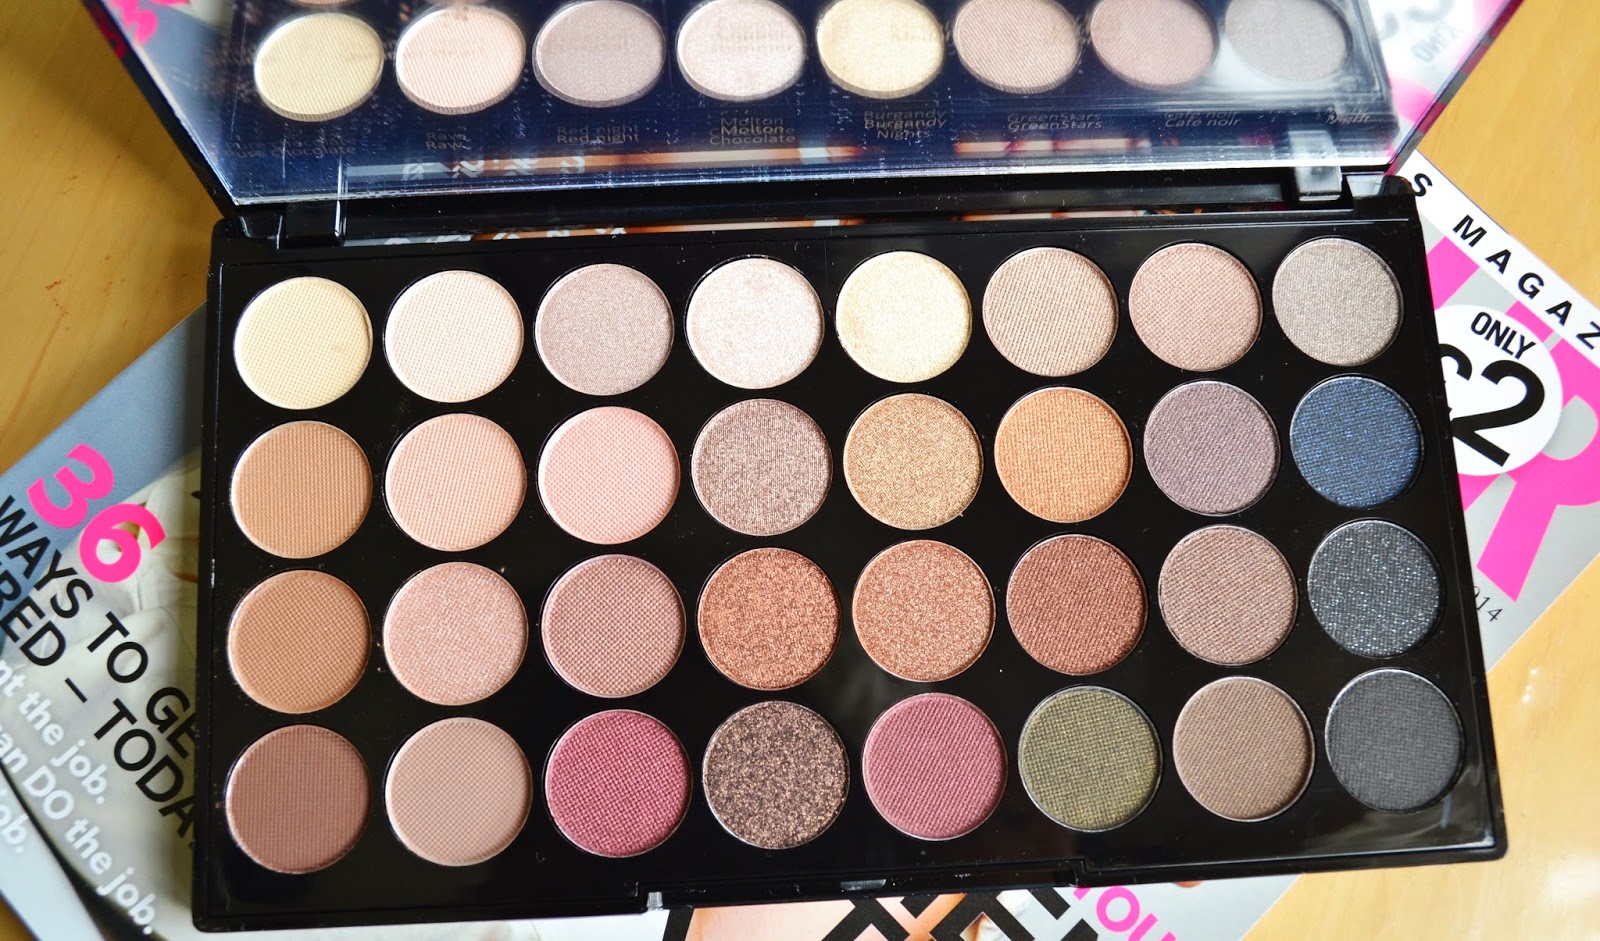 Makeup revolution 32 eyeshadow palette review